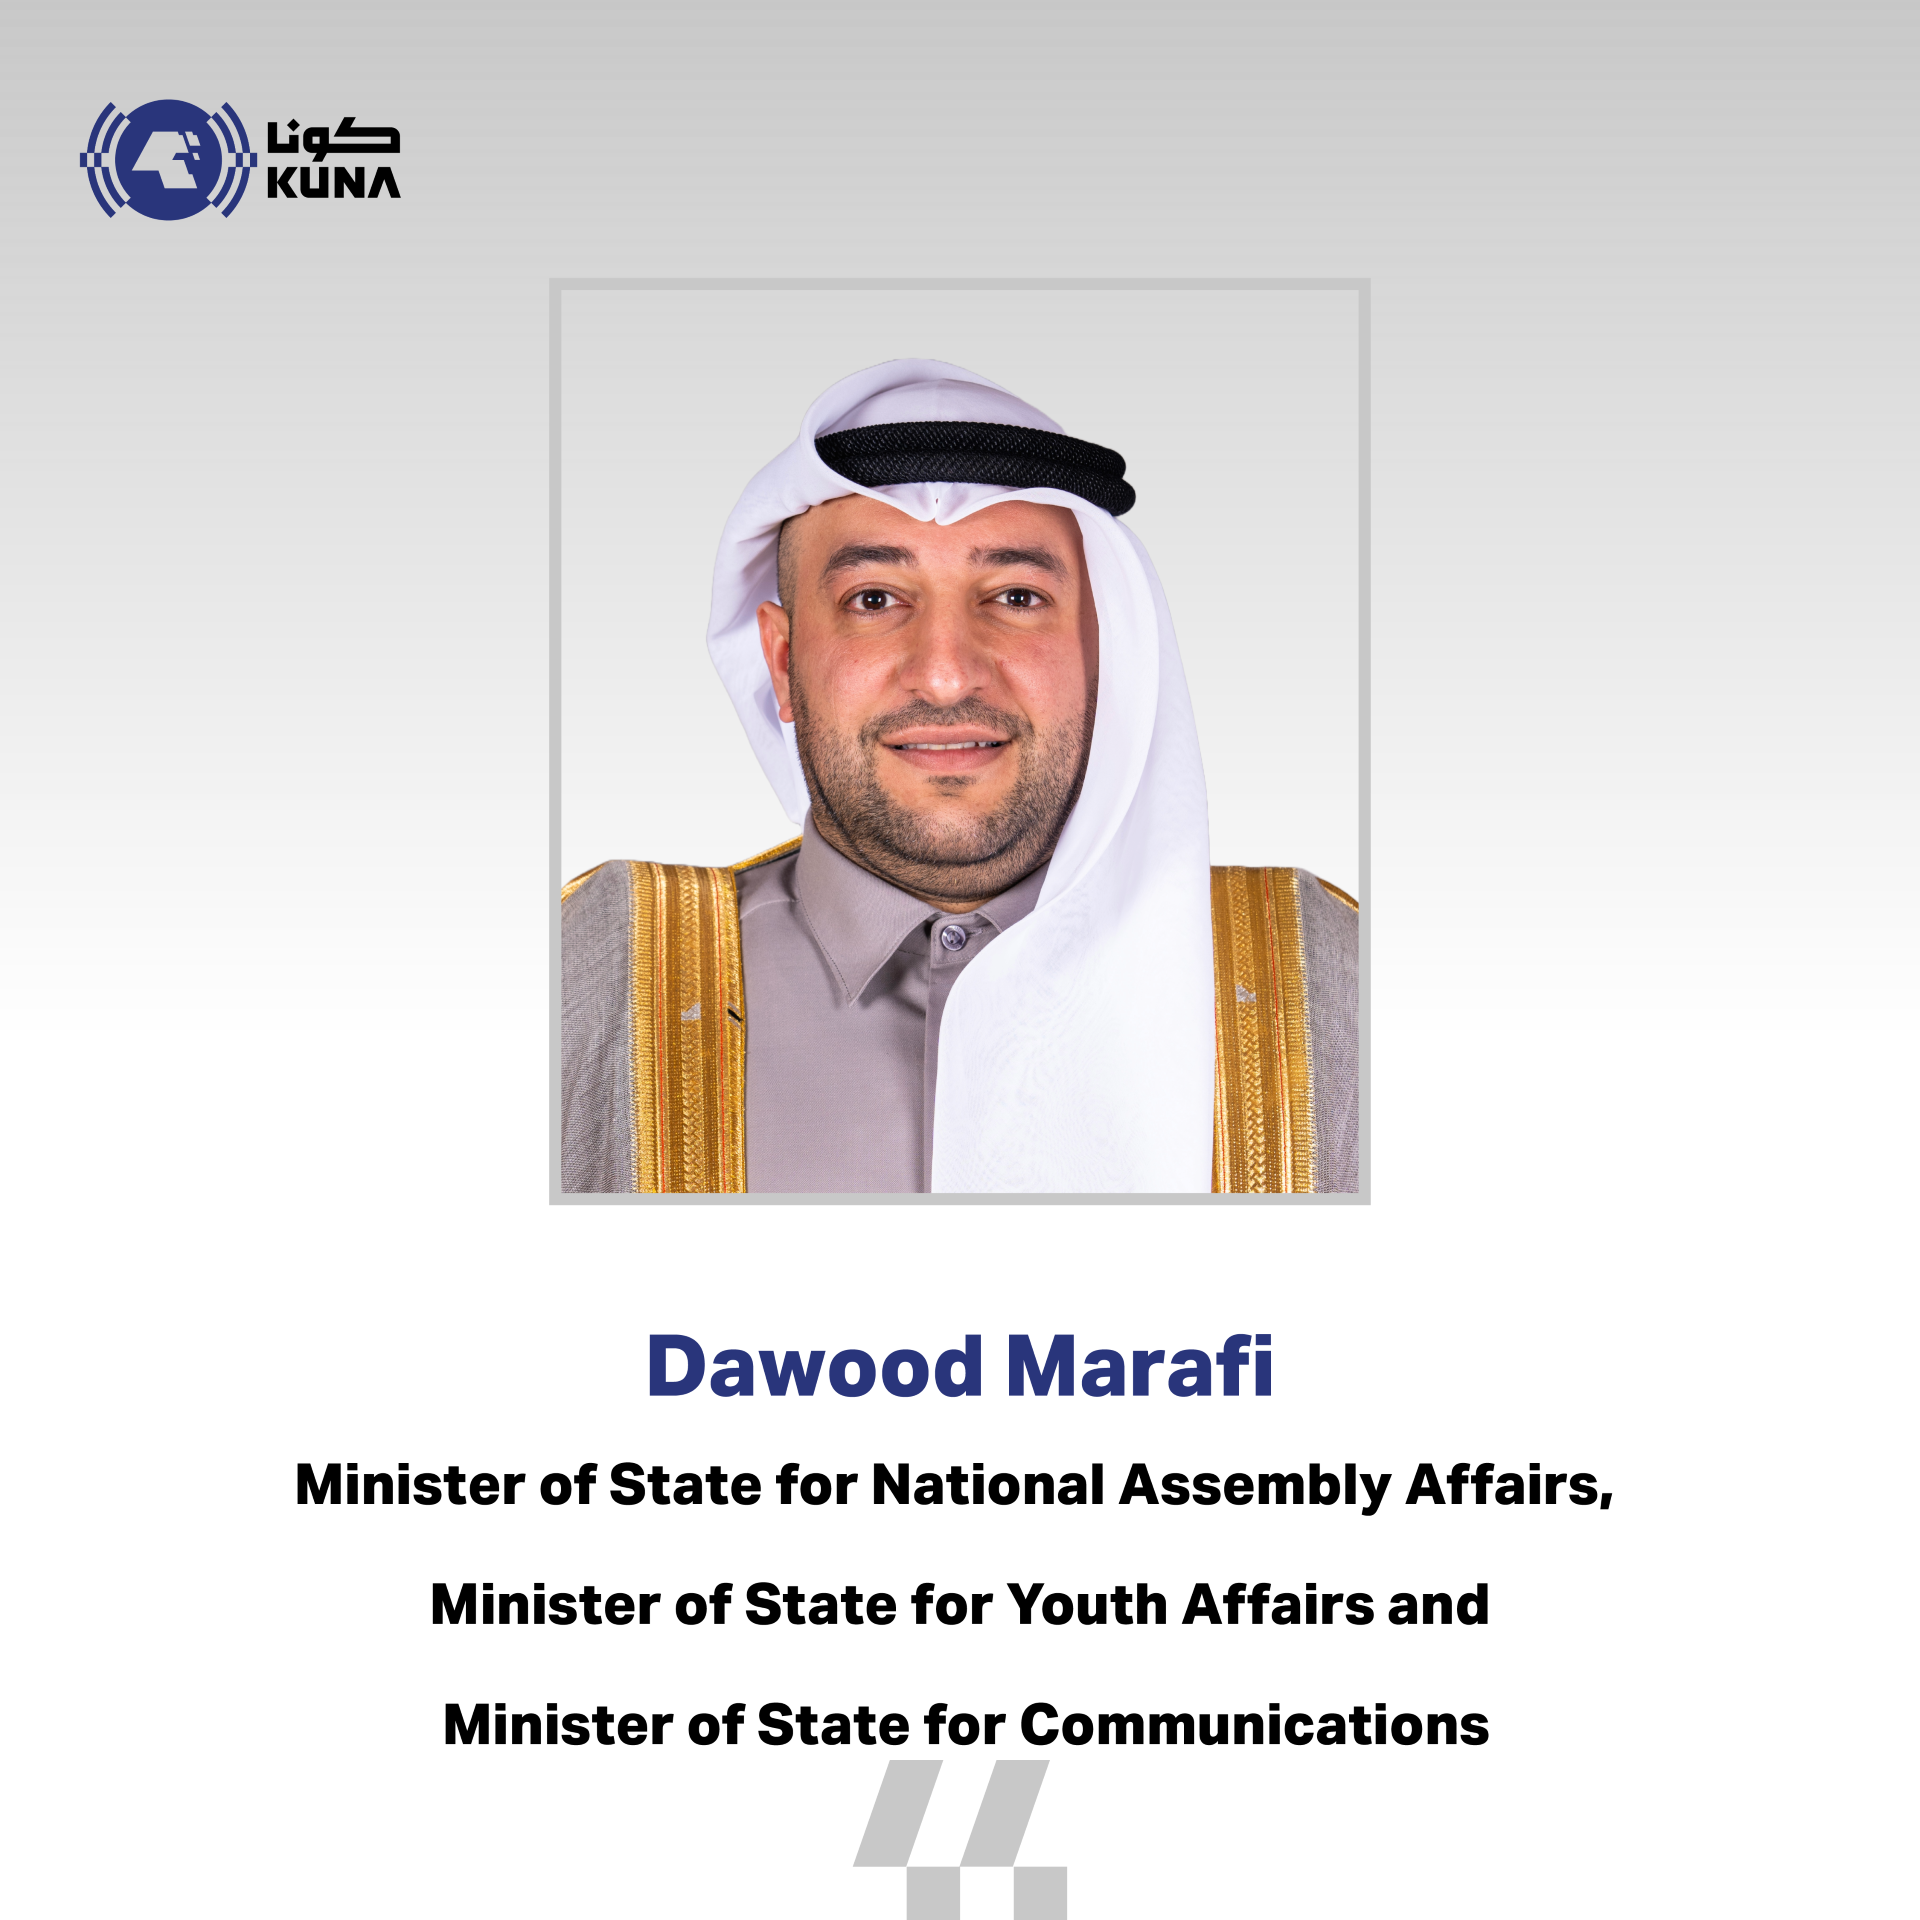 State Minister for Youth Affairs Dawood Maarafi